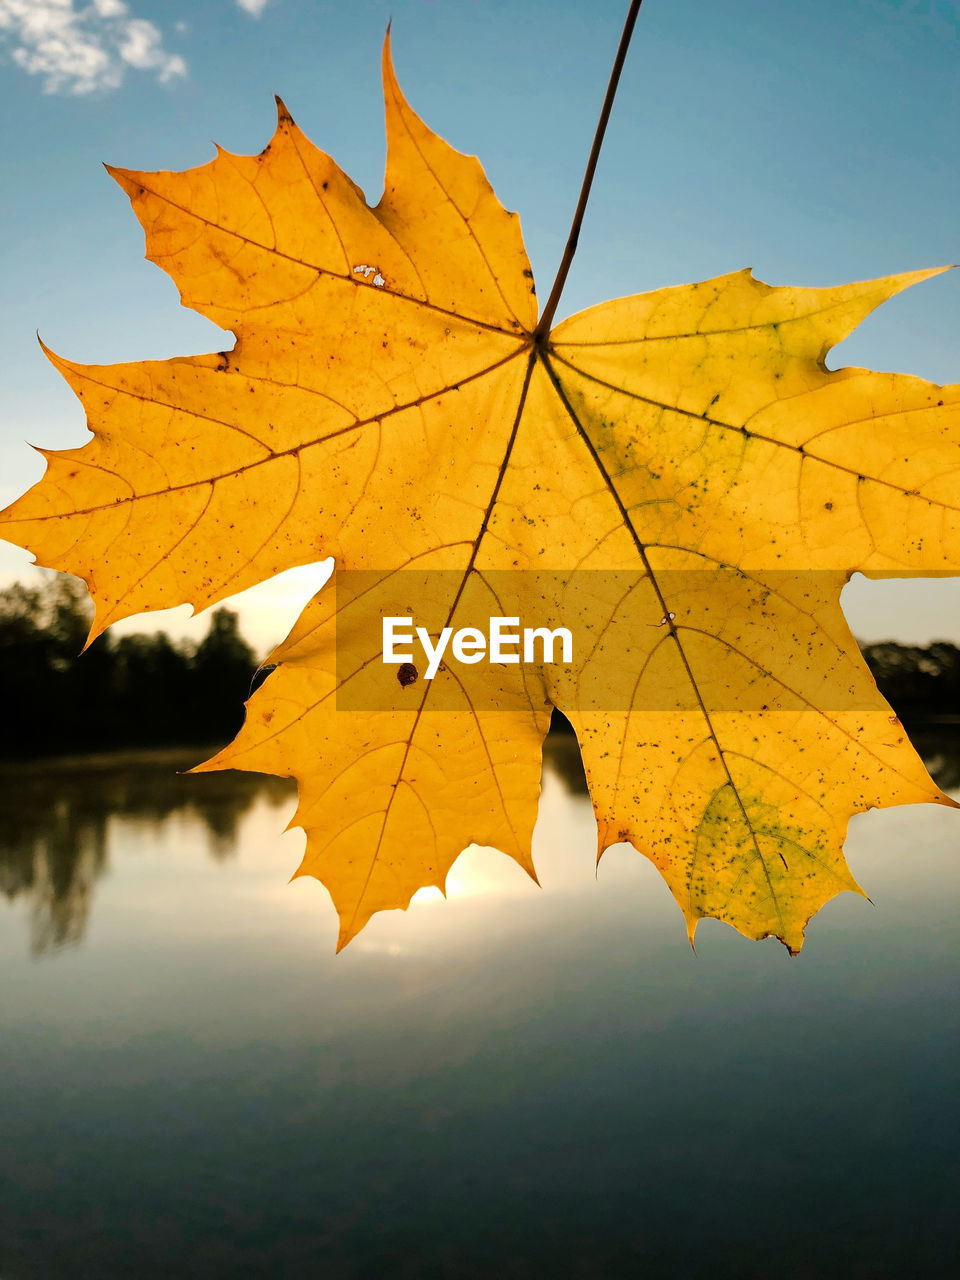 leaf, plant part, autumn, nature, tree, maple leaf, beauty in nature, yellow, plant, sky, reflection, water, maple, environment, no people, maple tree, outdoors, orange color, scenics - nature, tranquility, leaf vein, lake, land, day, dry, landscape, branch, close-up, idyllic